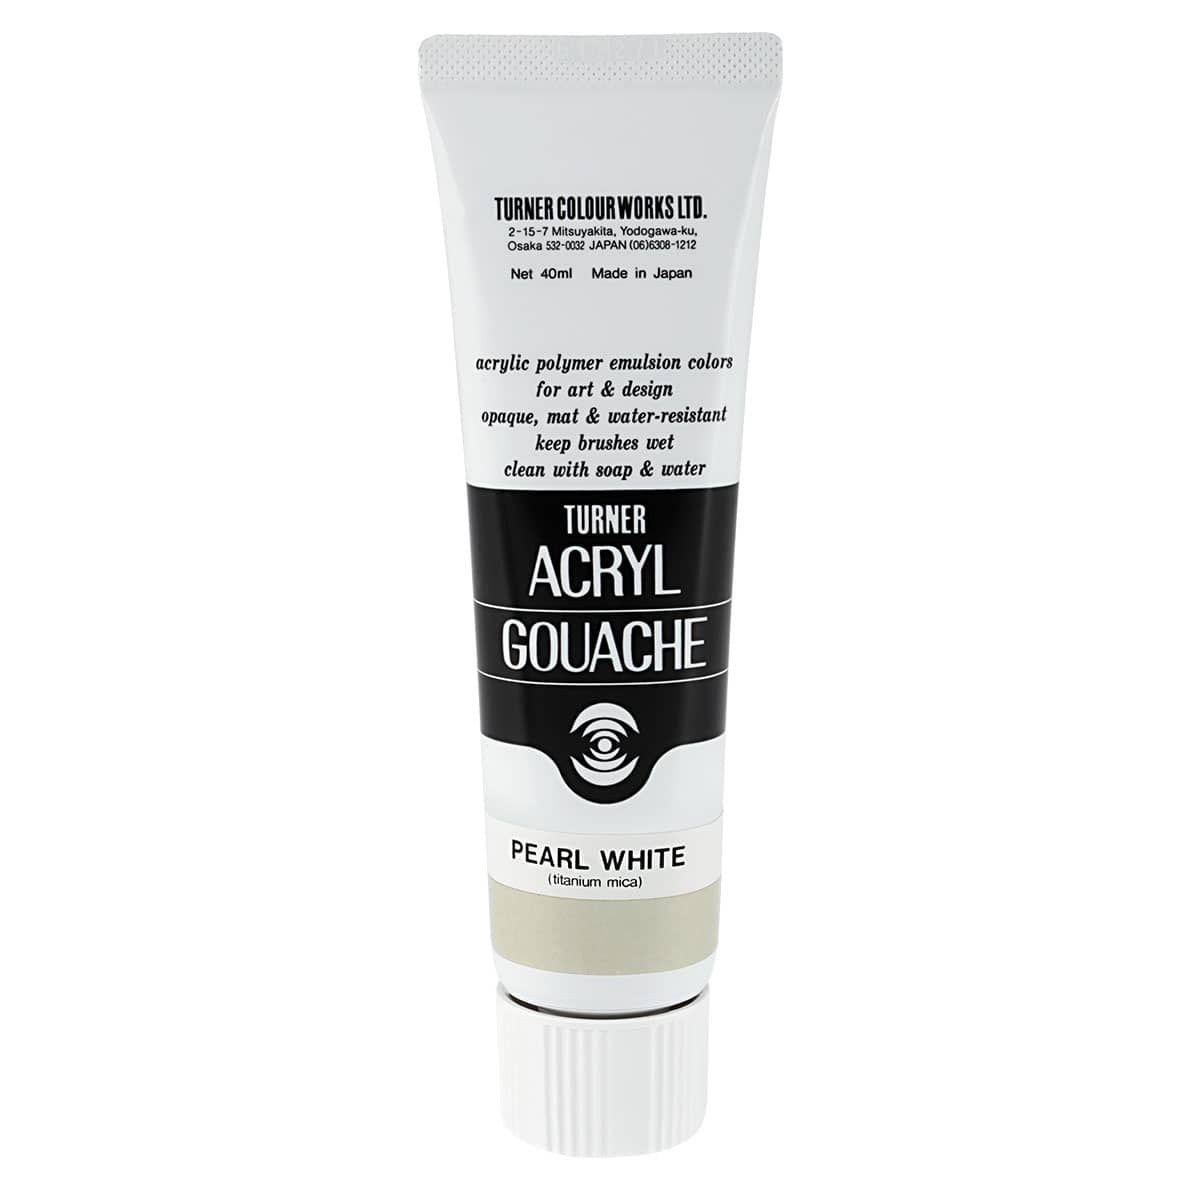 Turner Acryl Gouache Artist Acrylics Pearl Interference White, 40ml